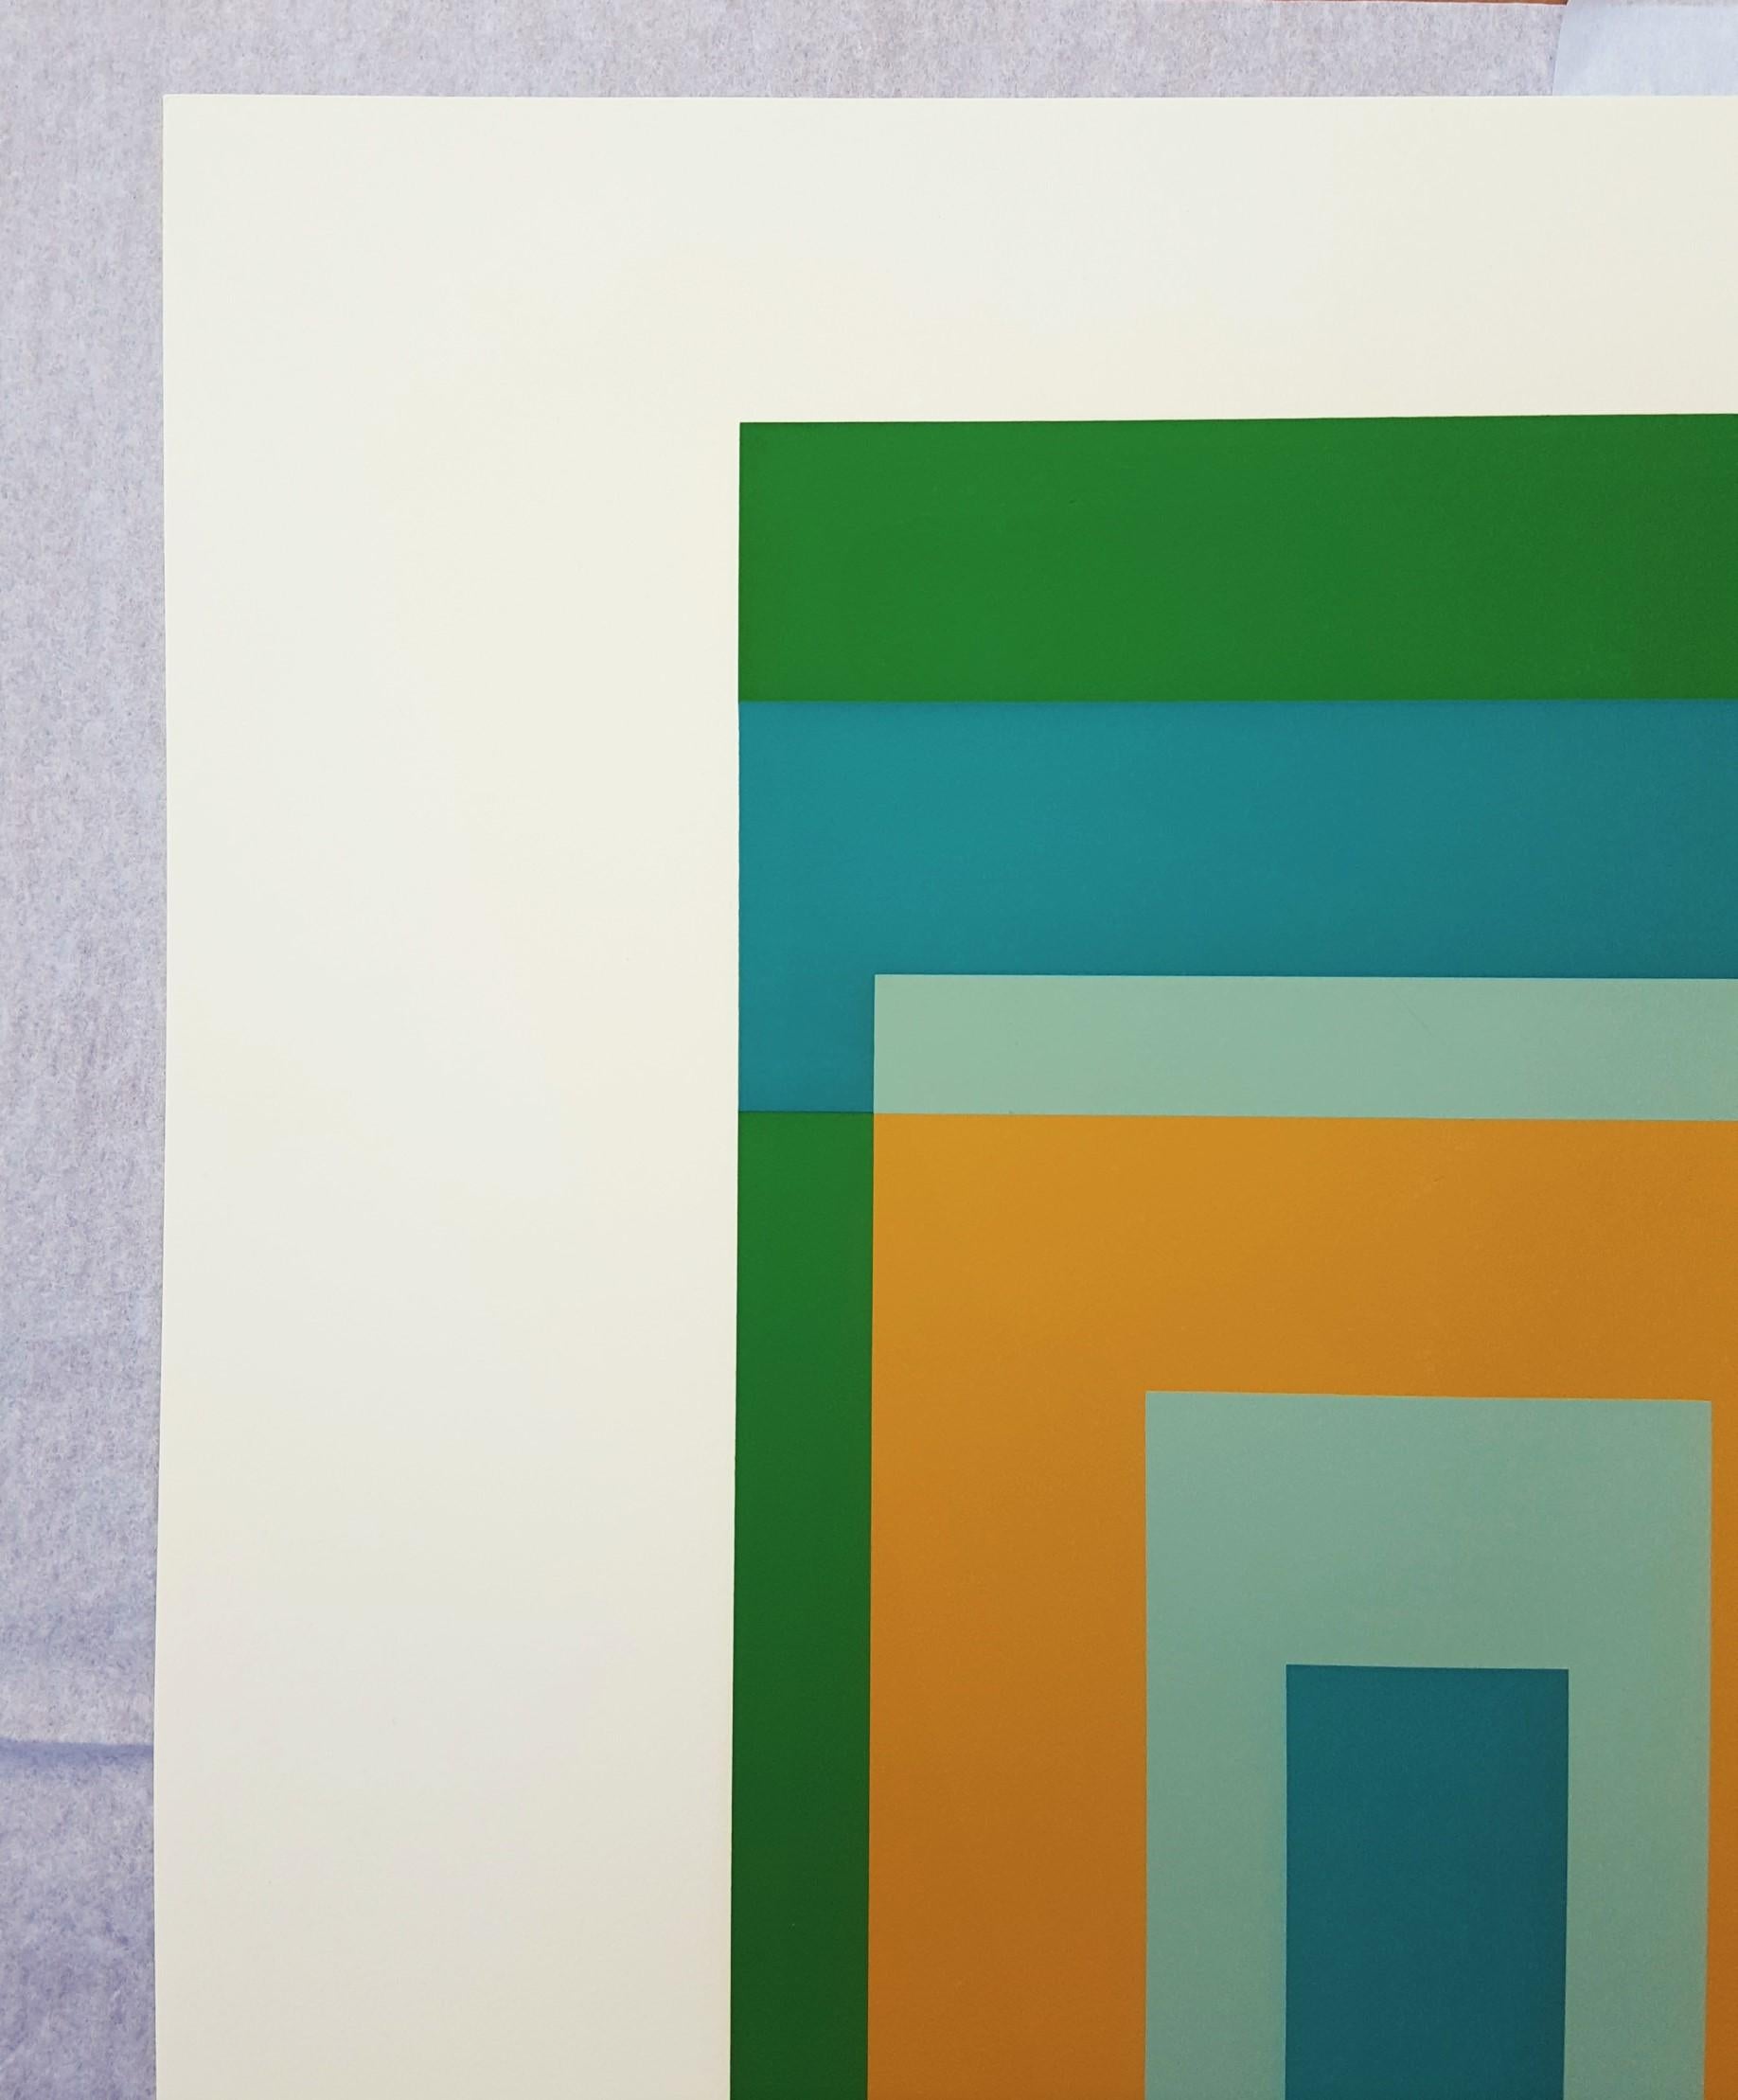 An original signed screenprint on Arches wove paper by German-American artist Josef Albers (1888-1976) titled 